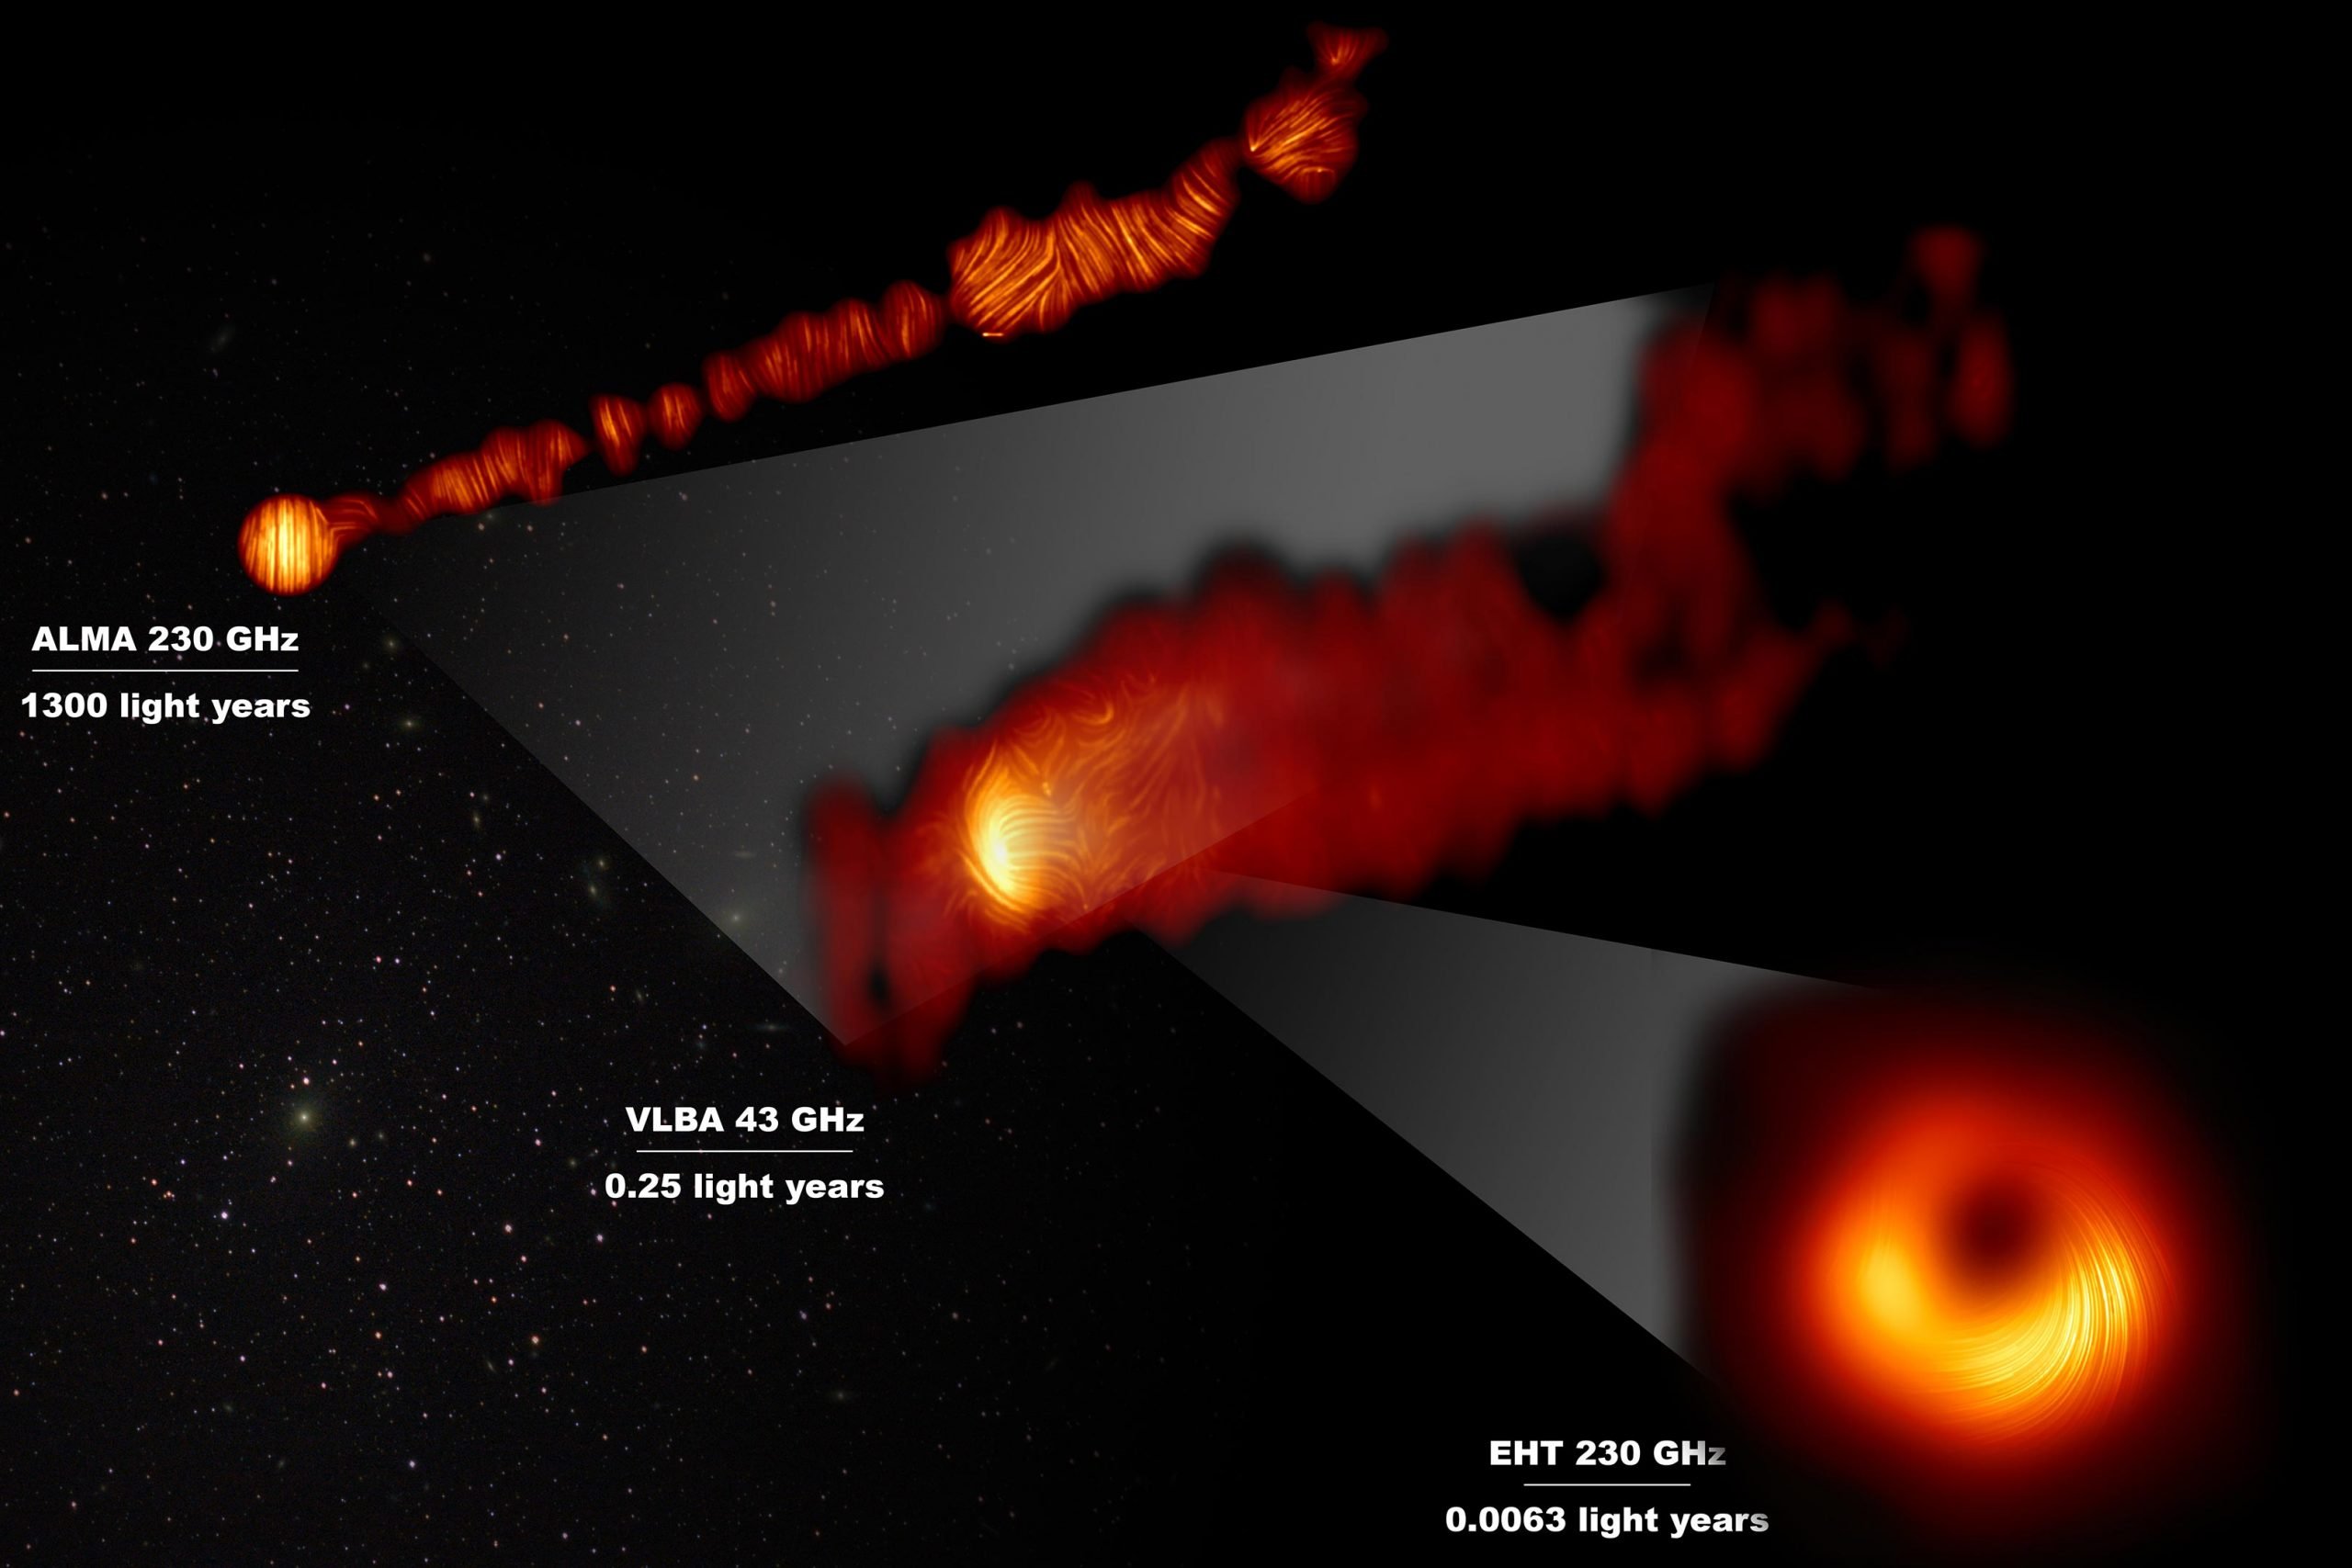 Event Horizon Telescope Images Magnetic Fields at the Edge of M87’s Supermassive Black Hole